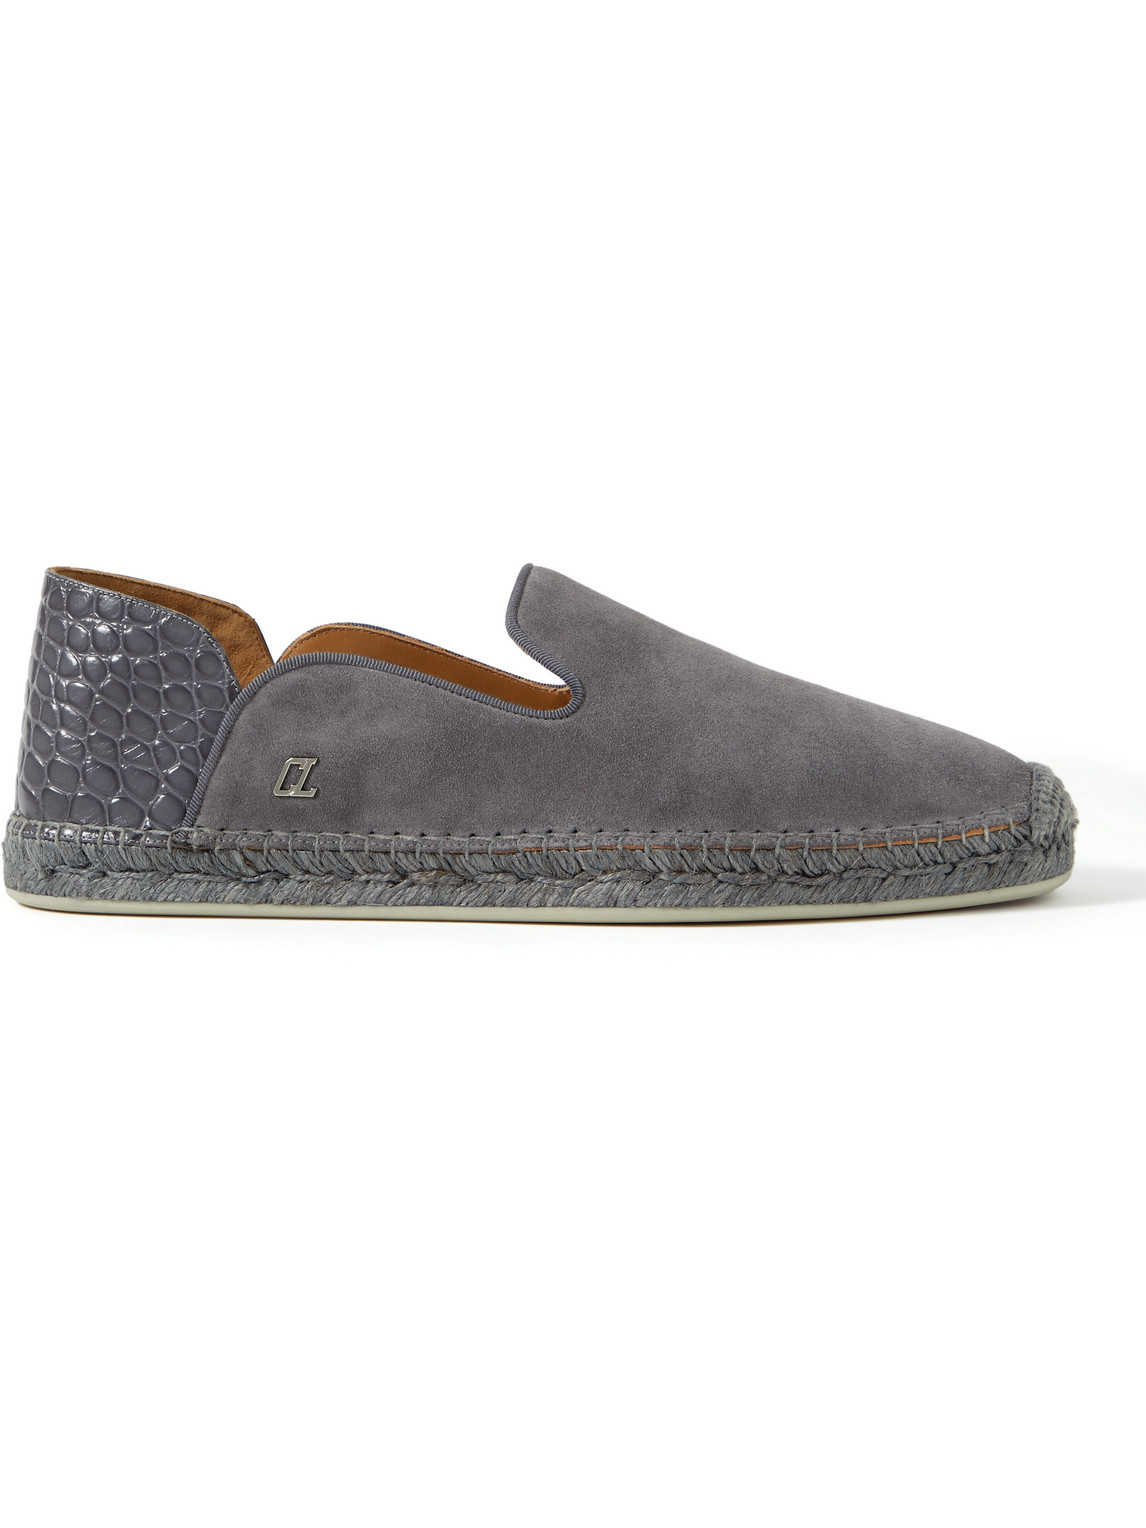 Christian Louboutin Collapsible-heel Croc-effect Leather-trimmed Suede Espadrilles In Gray